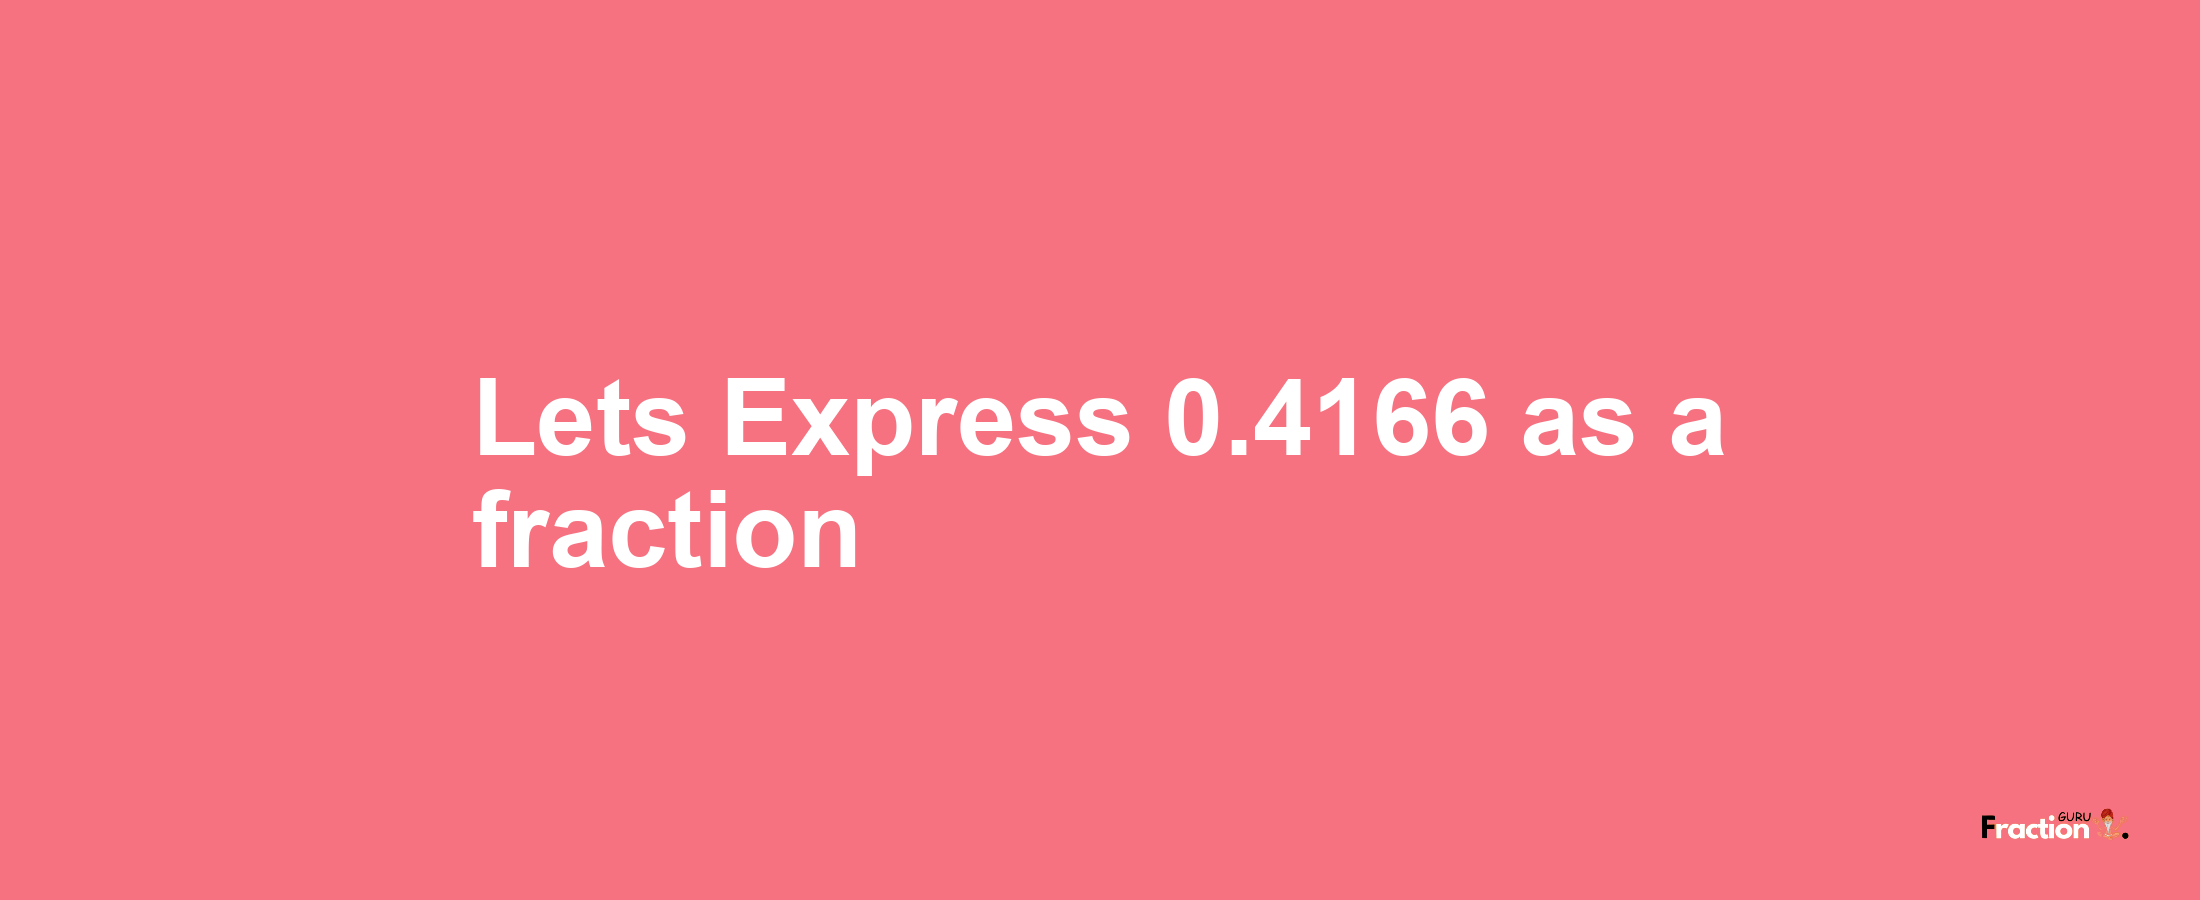 Lets Express 0.4166 as afraction